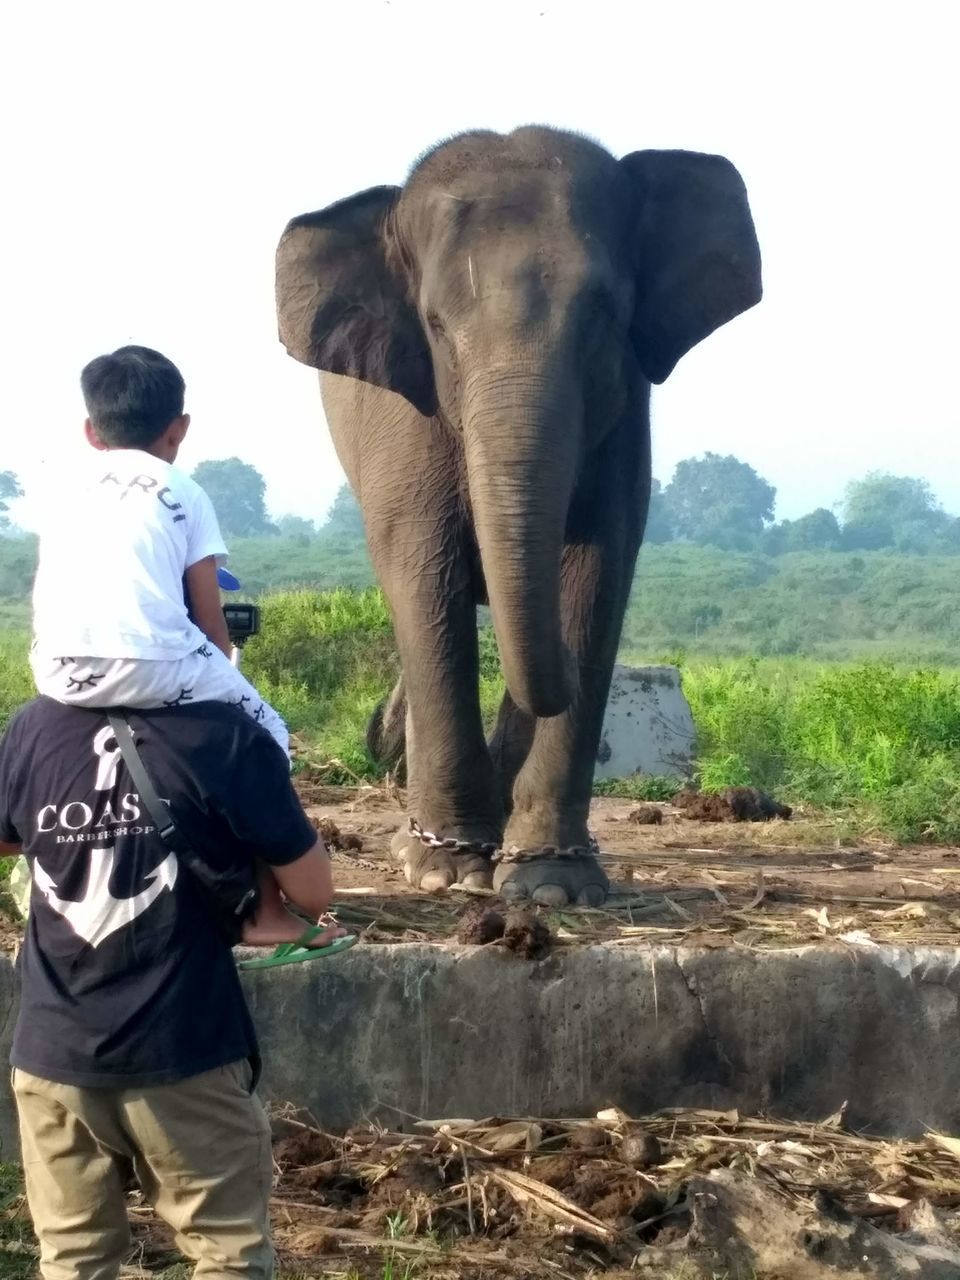 mammal, elephant, animal, animal themes, indian elephant, animal wildlife, men, one animal, animal body part, nature, rear view, wildlife, adventure, adult, person, land, asian elephant, clothing, standing, travel, safari, domestic animals, tourism, animal trunk, child, outdoors, day, full length, childhood, environment, plant, tree, african elephant, walking